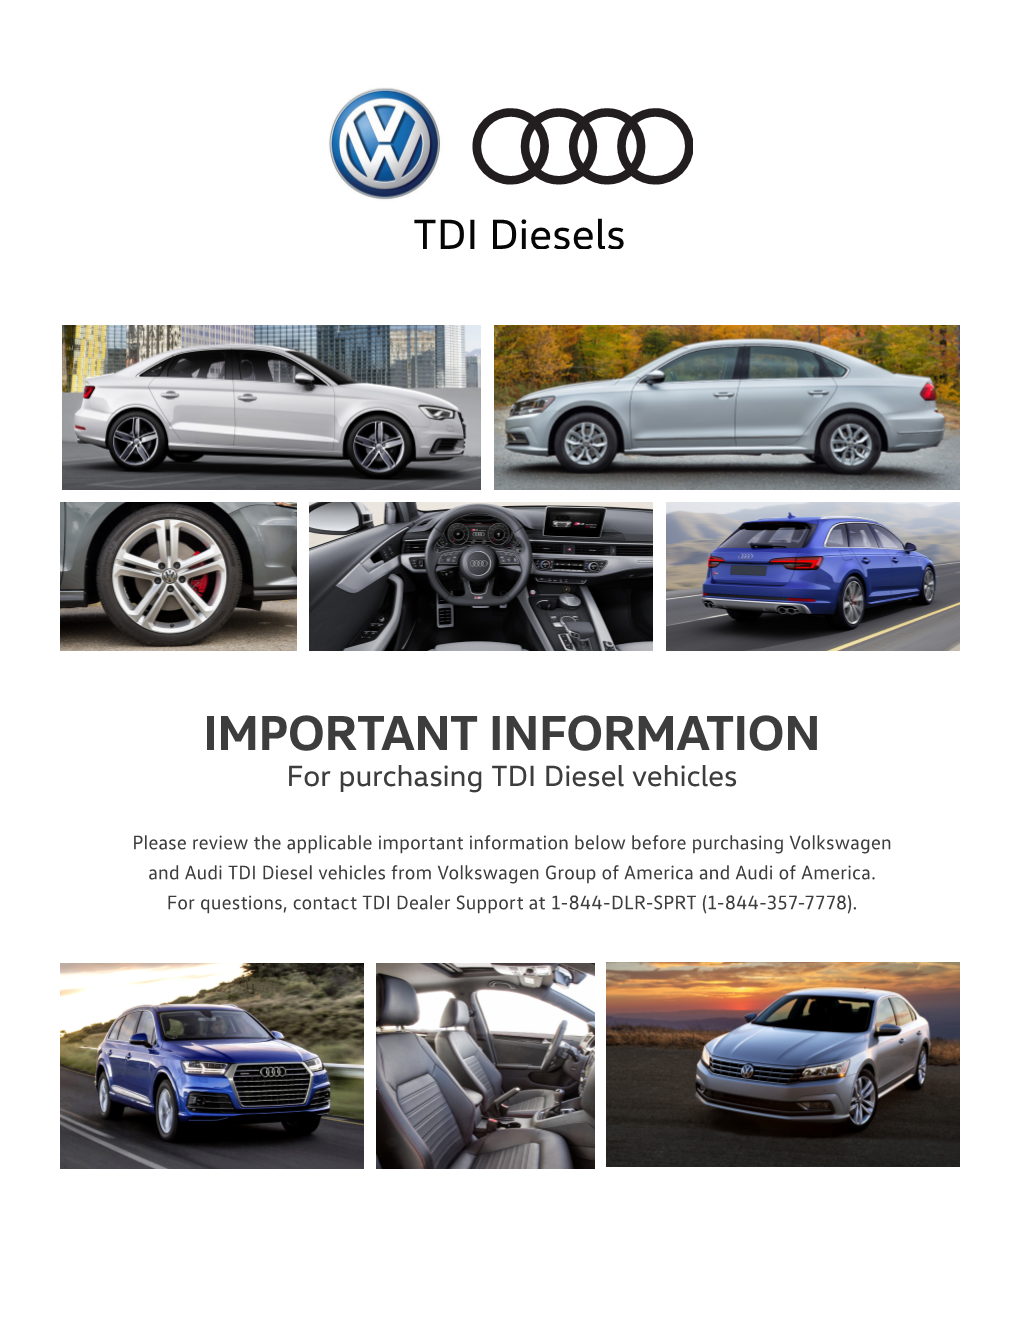 IMPORTANT INFORMATION for Purchasing TDI Diesel Vehicles